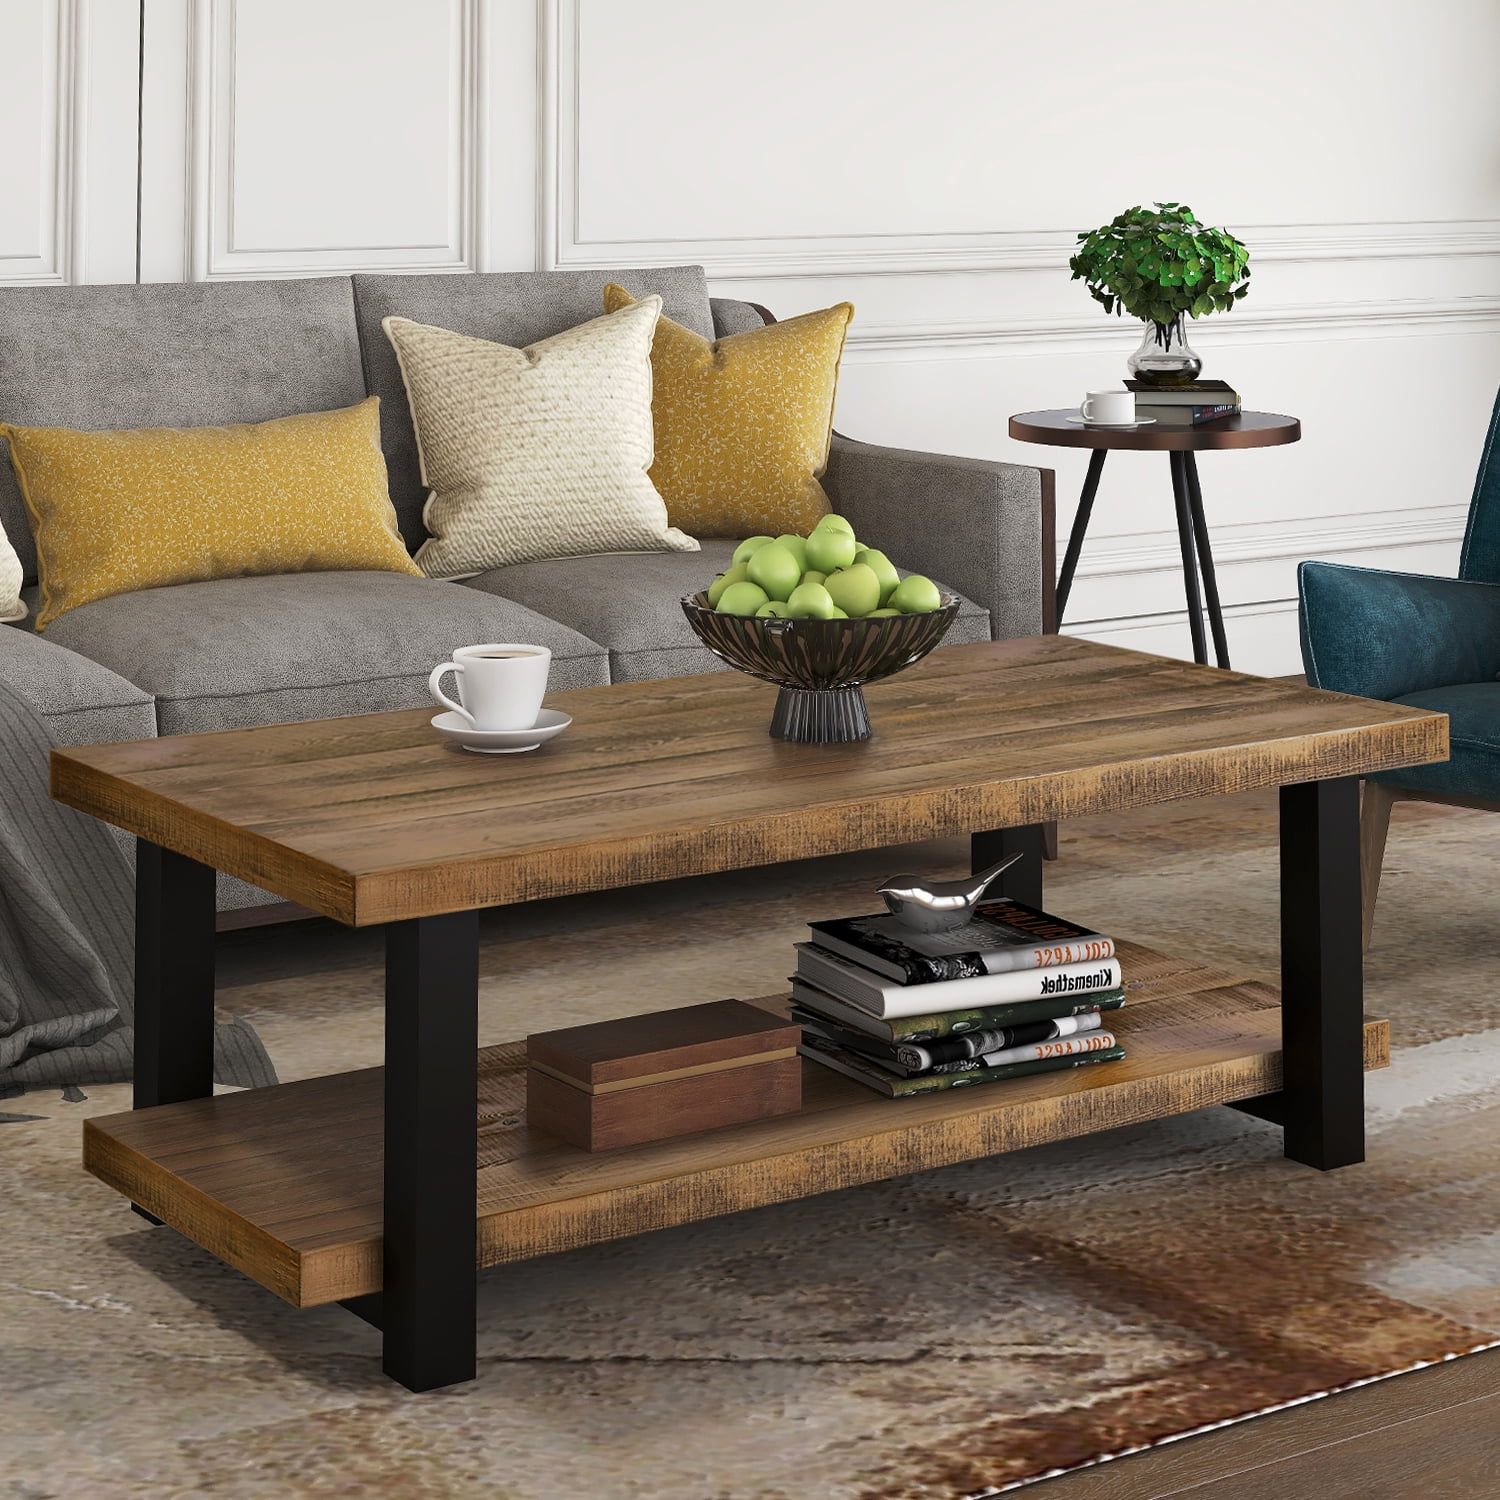 Topcobe Rustic Natural Coffee Table With Storage Shelf, Side End Table Within Rectangular Coffee Tables With Pedestal Bases (View 2 of 20)